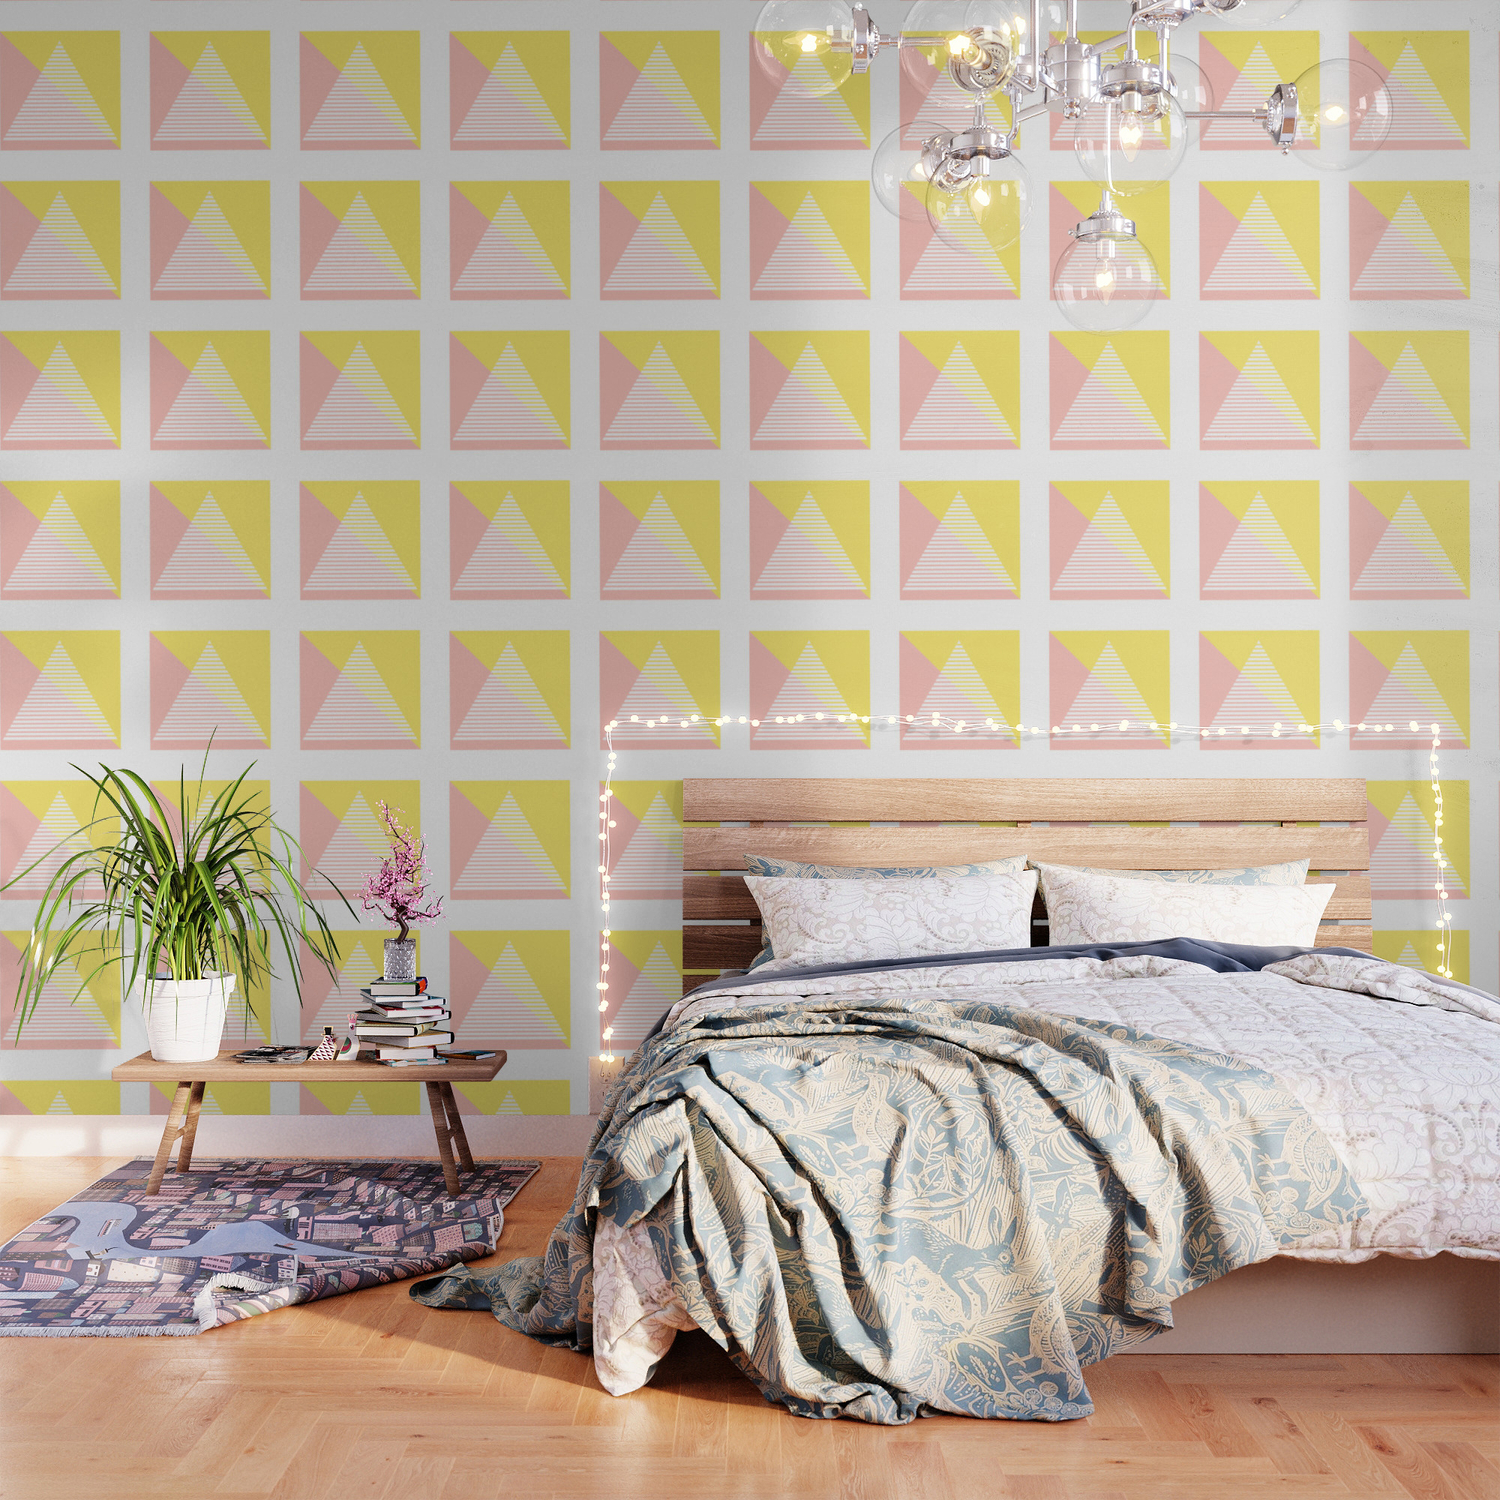 Opaque Wallpaper by wowwow | Society6